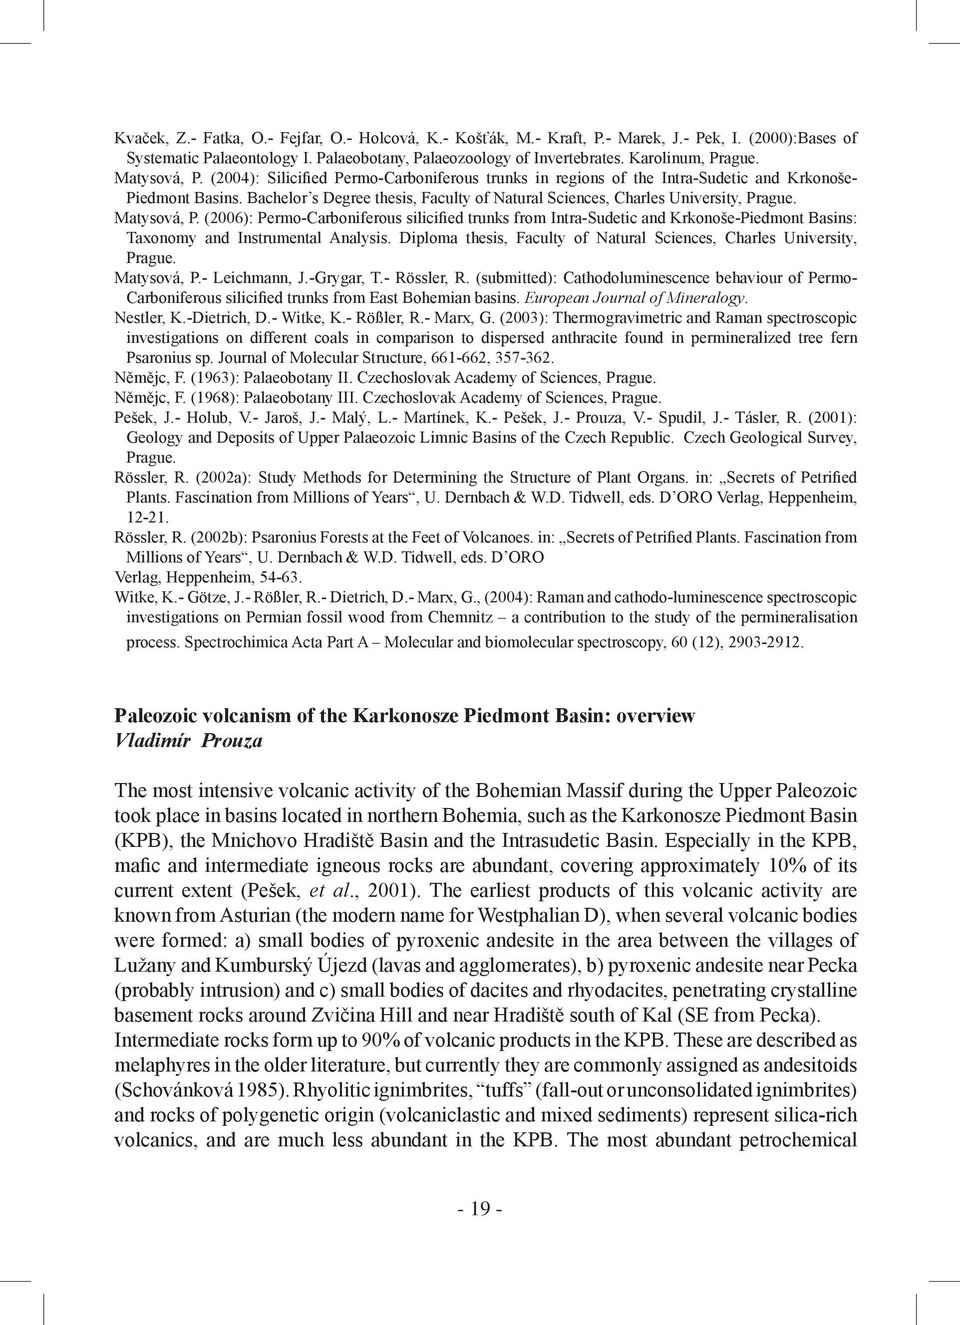 Bachelor s Degree thesis, Faculty of Natural Sciences, Charles University, Prague. Matysová, P.